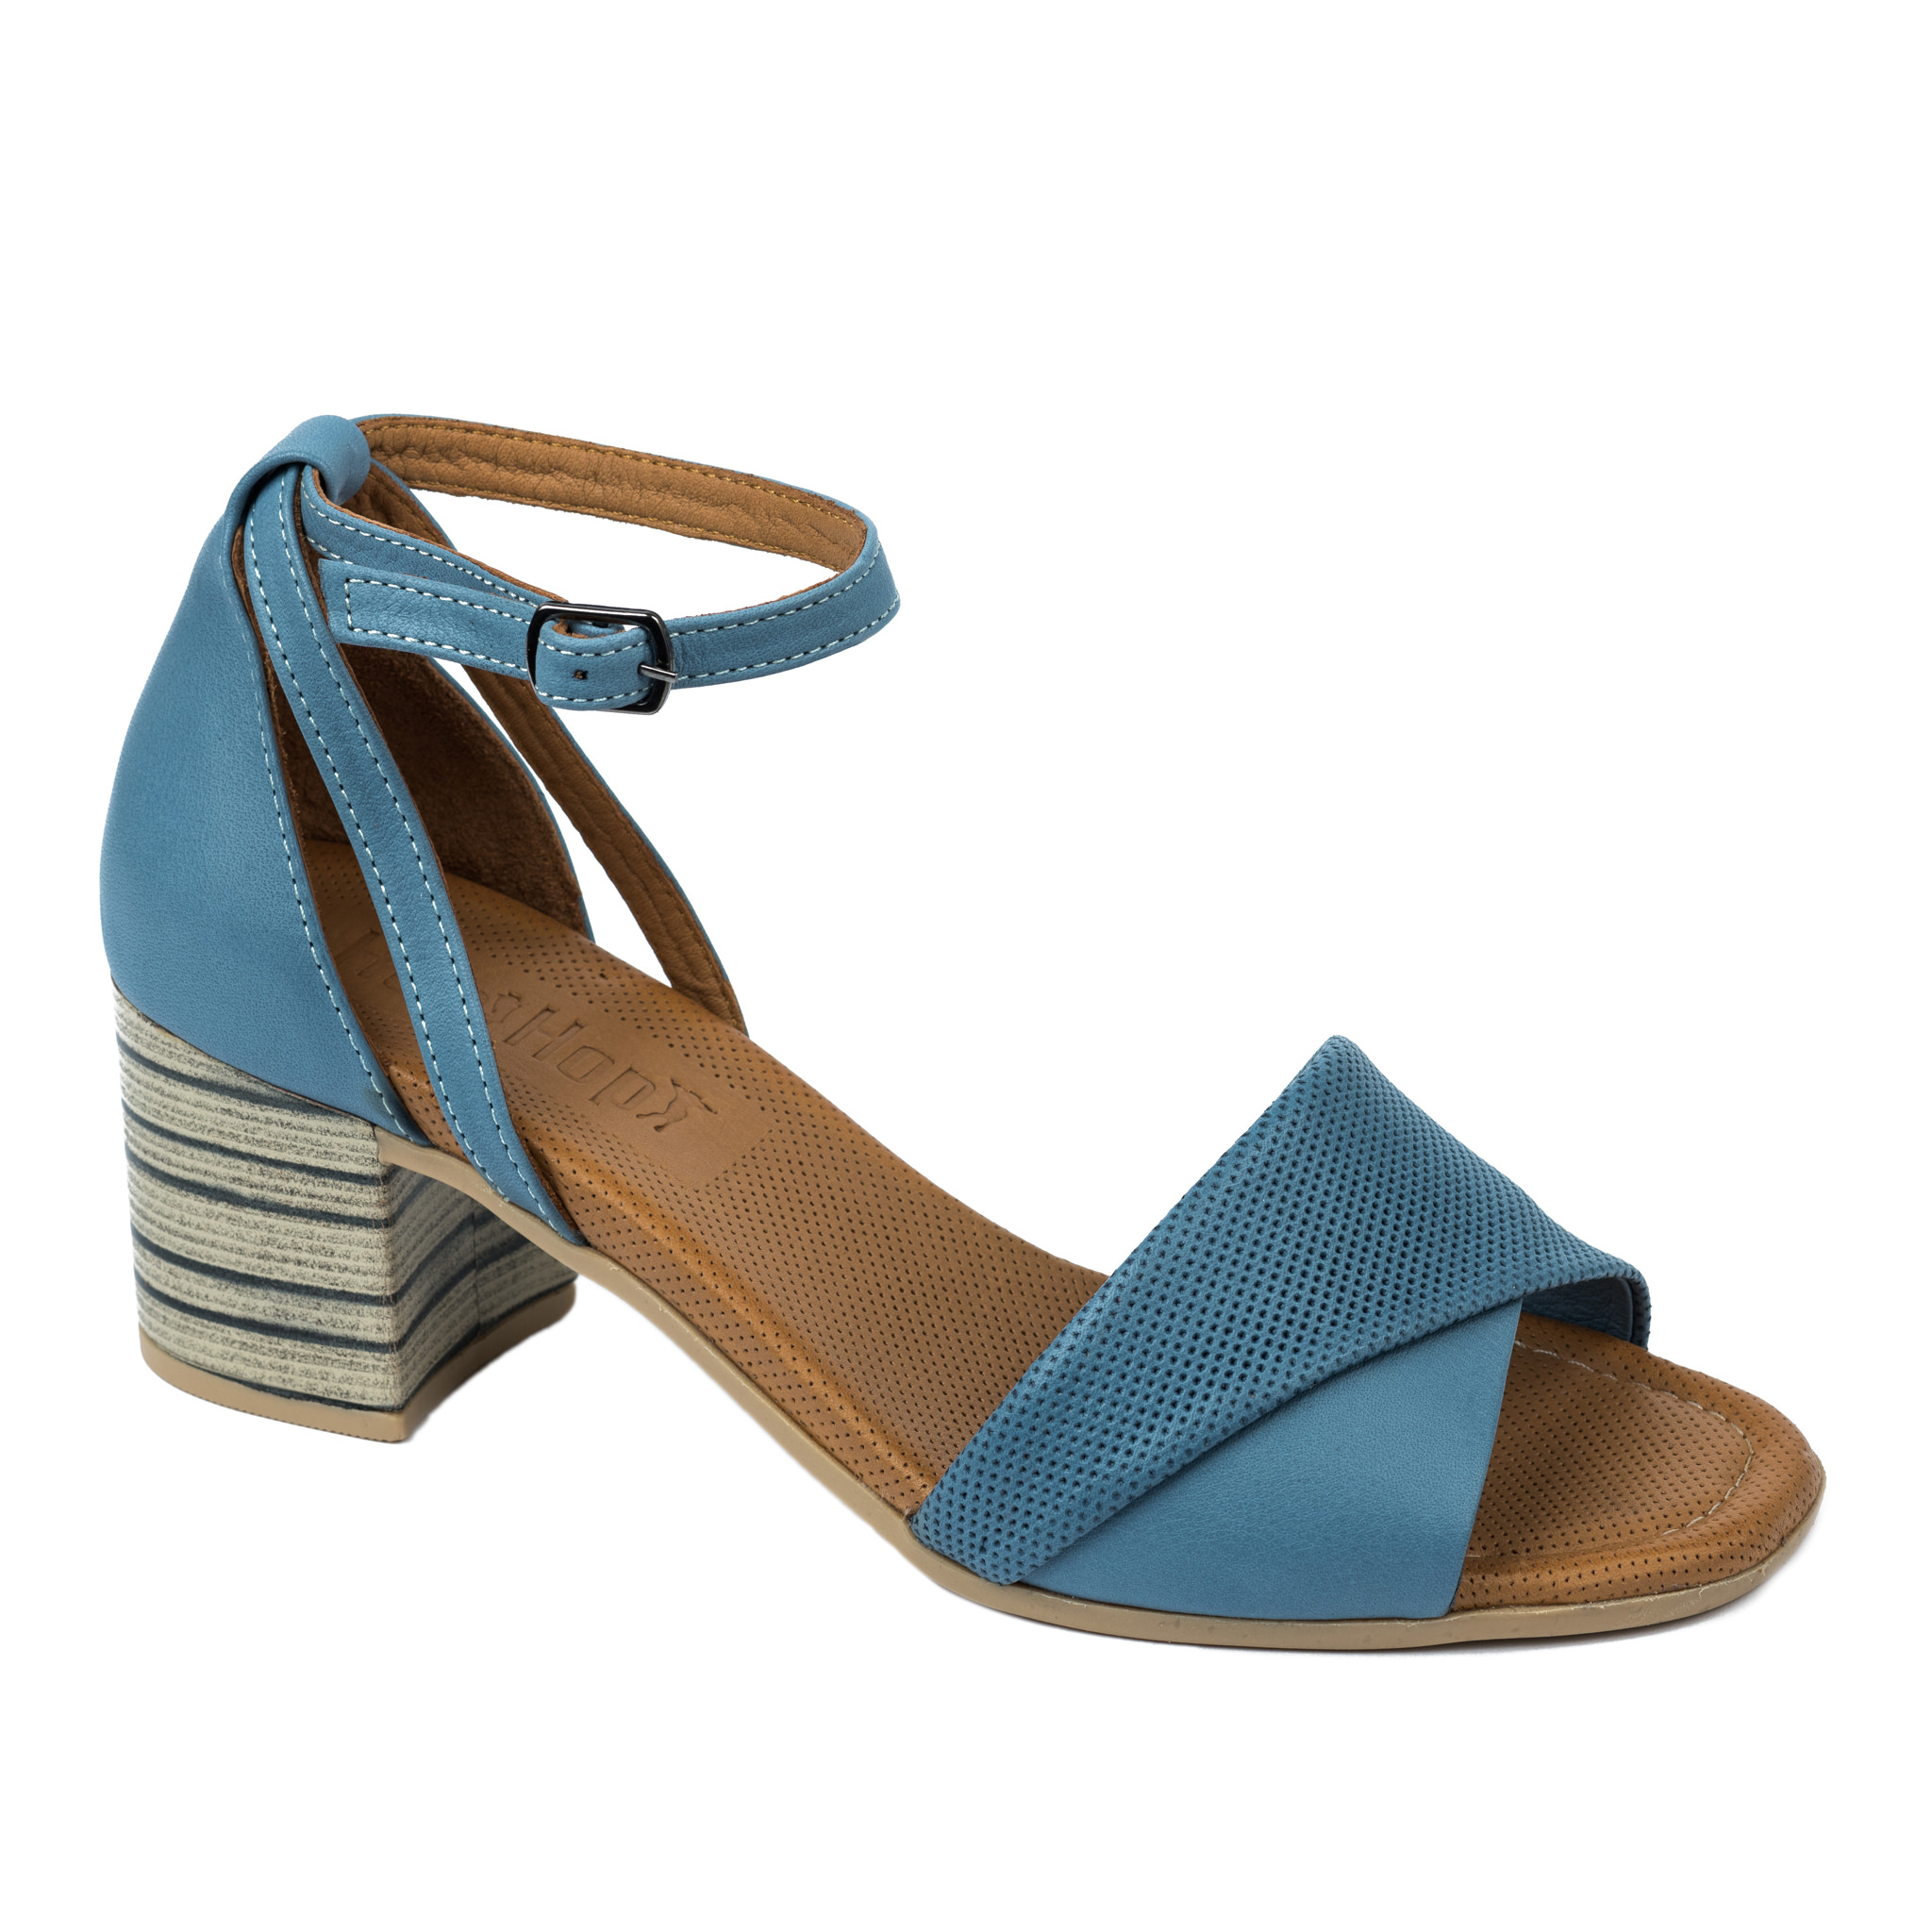 Leather sandals A672 - BLUE